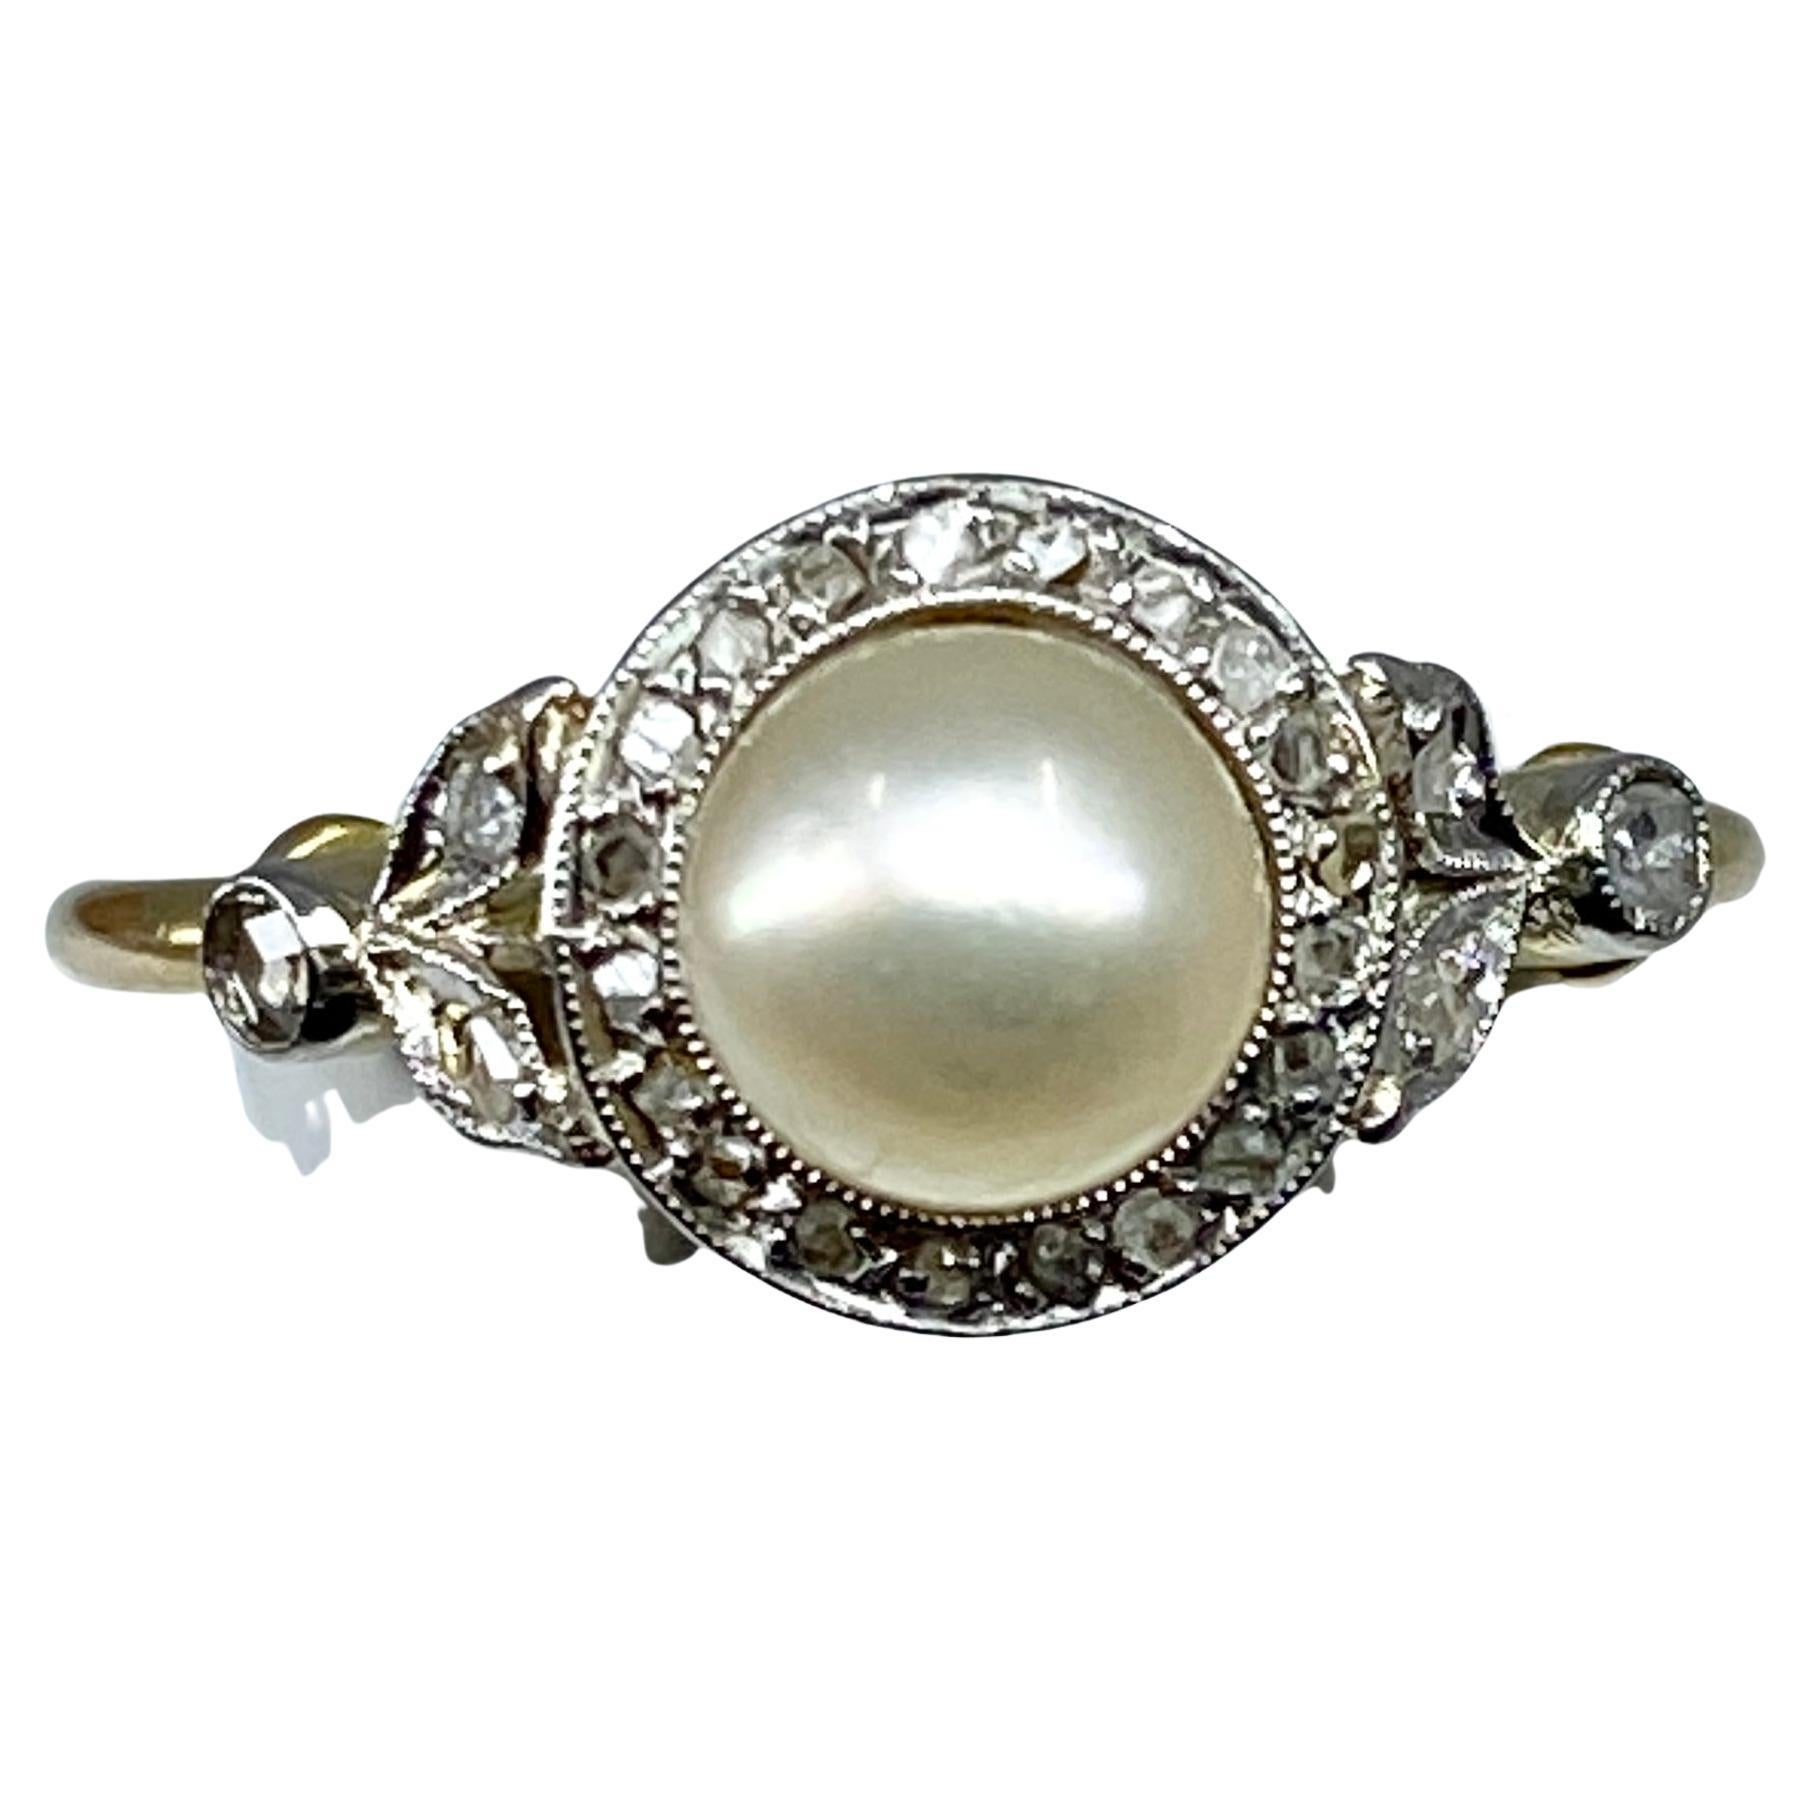 18 carat gold ring set with a pearl and diamonds, 1900 period. For Sale